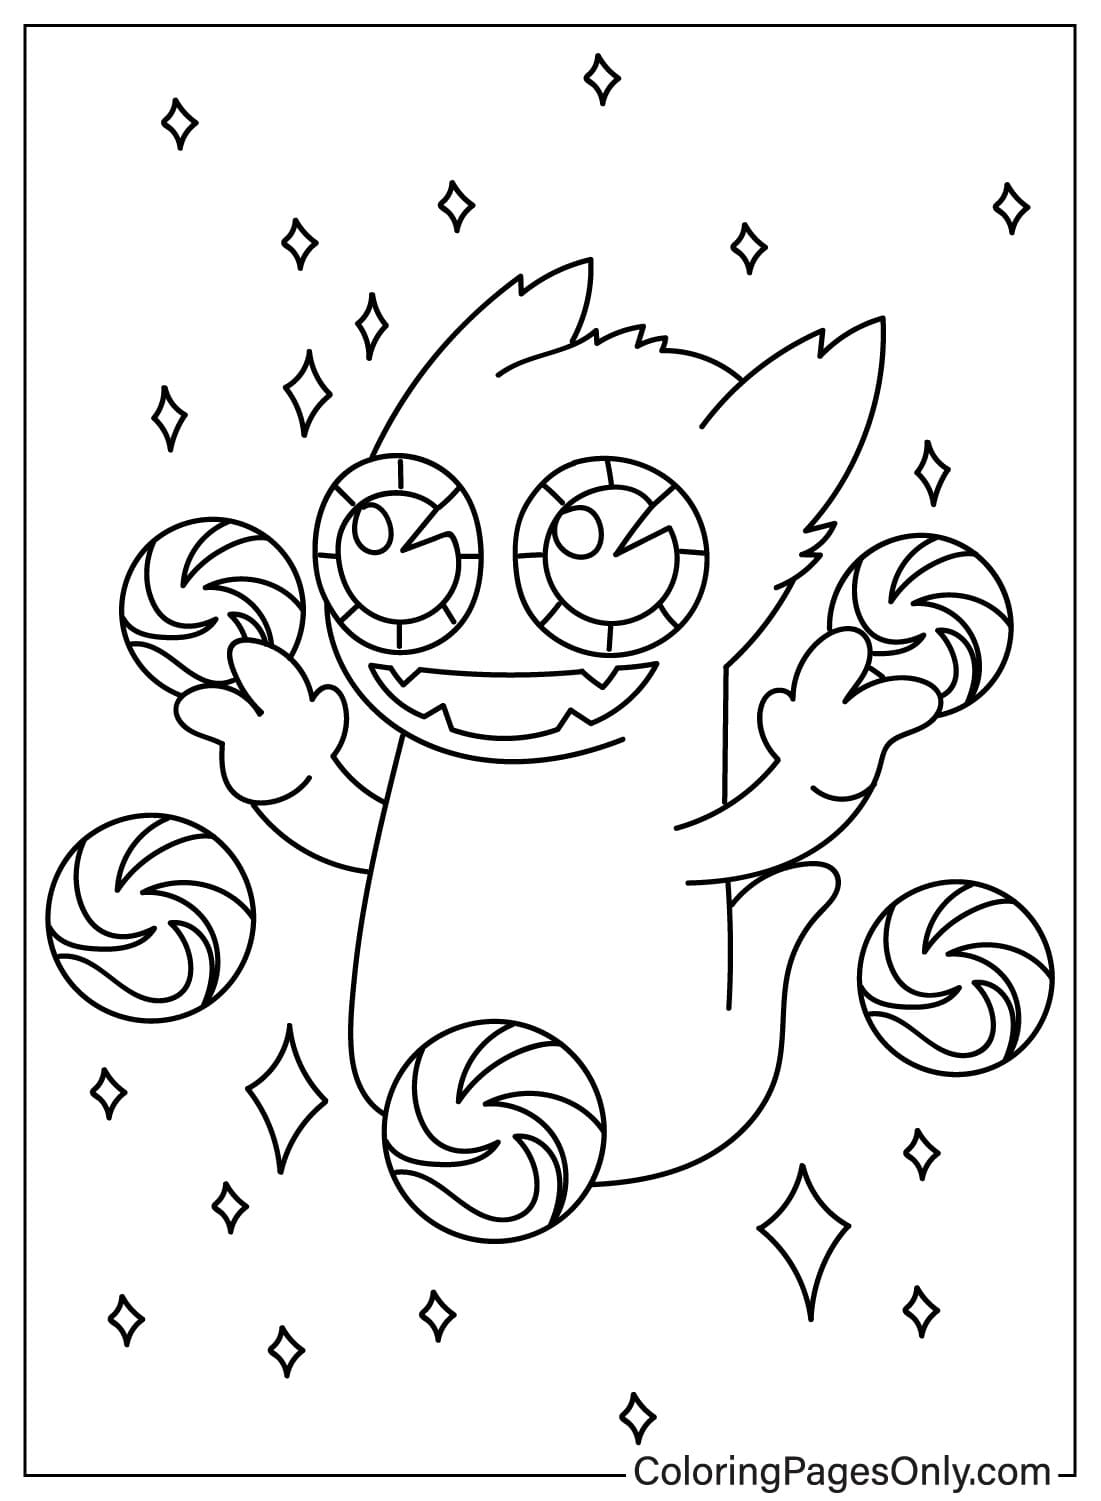 Cute Ghazt Coloring Page from Ghazt